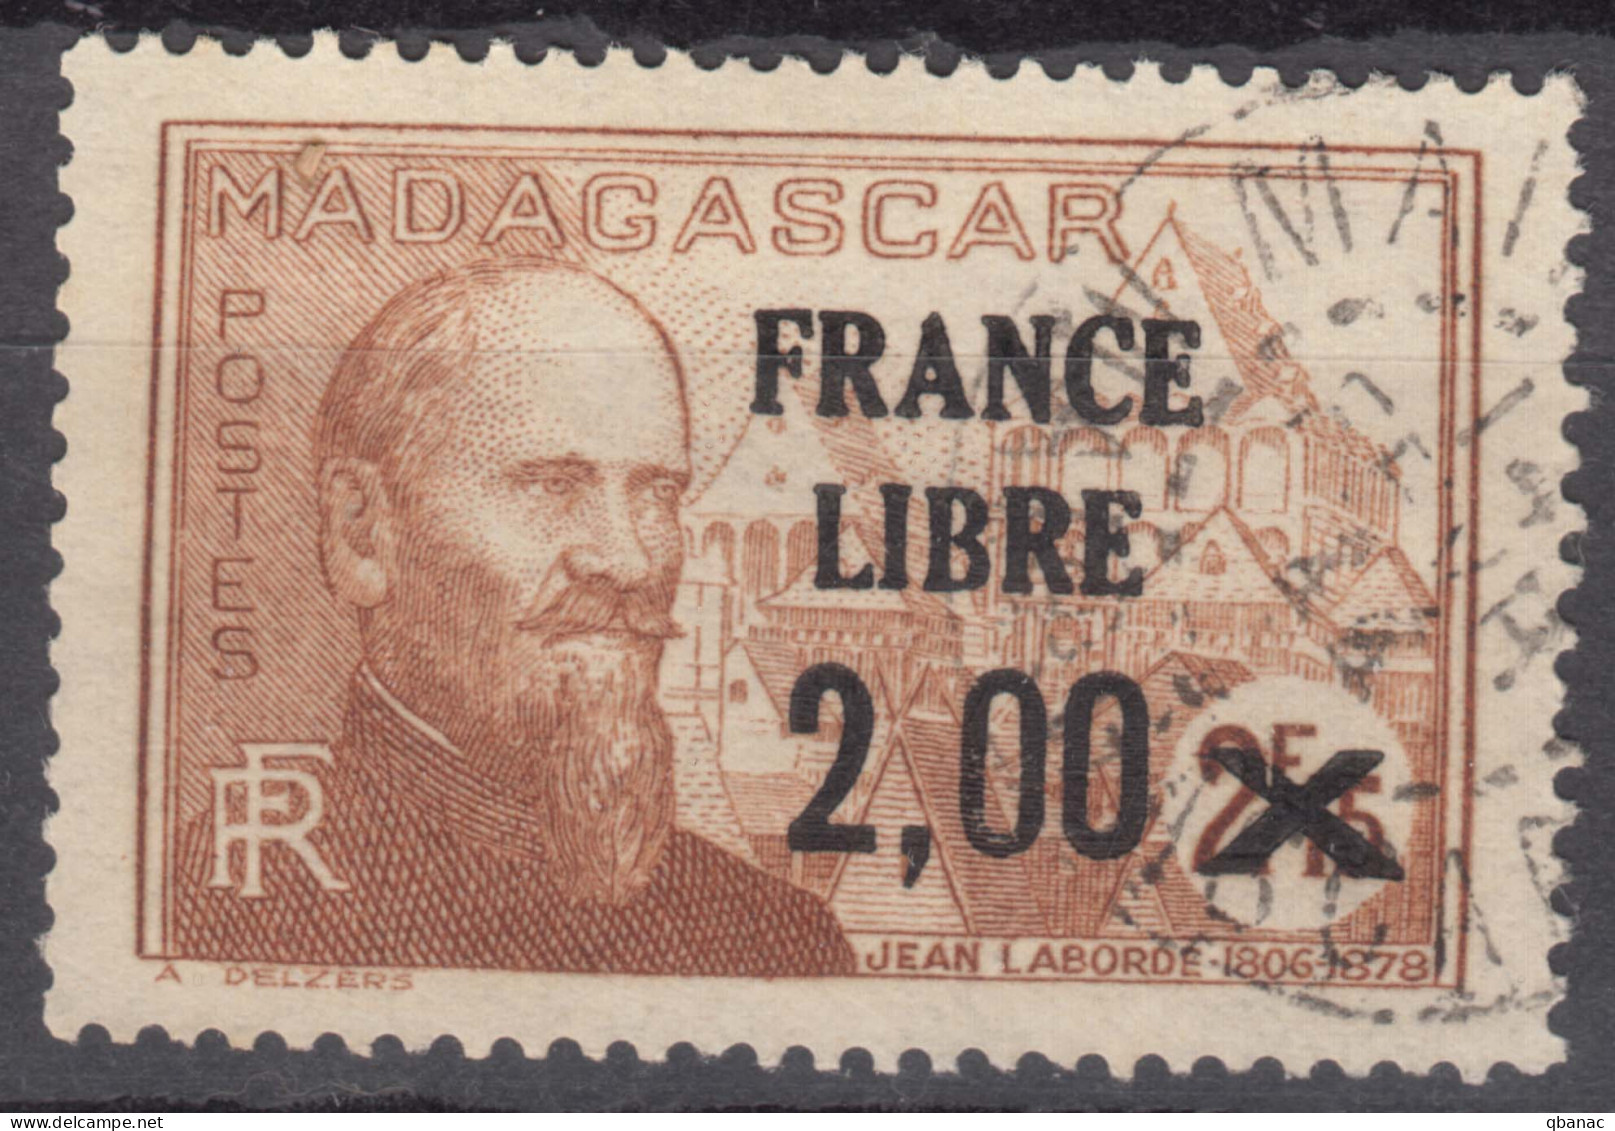 Madagascar 1943 FRANCE LIBRE Mi#314 Used - Used Stamps